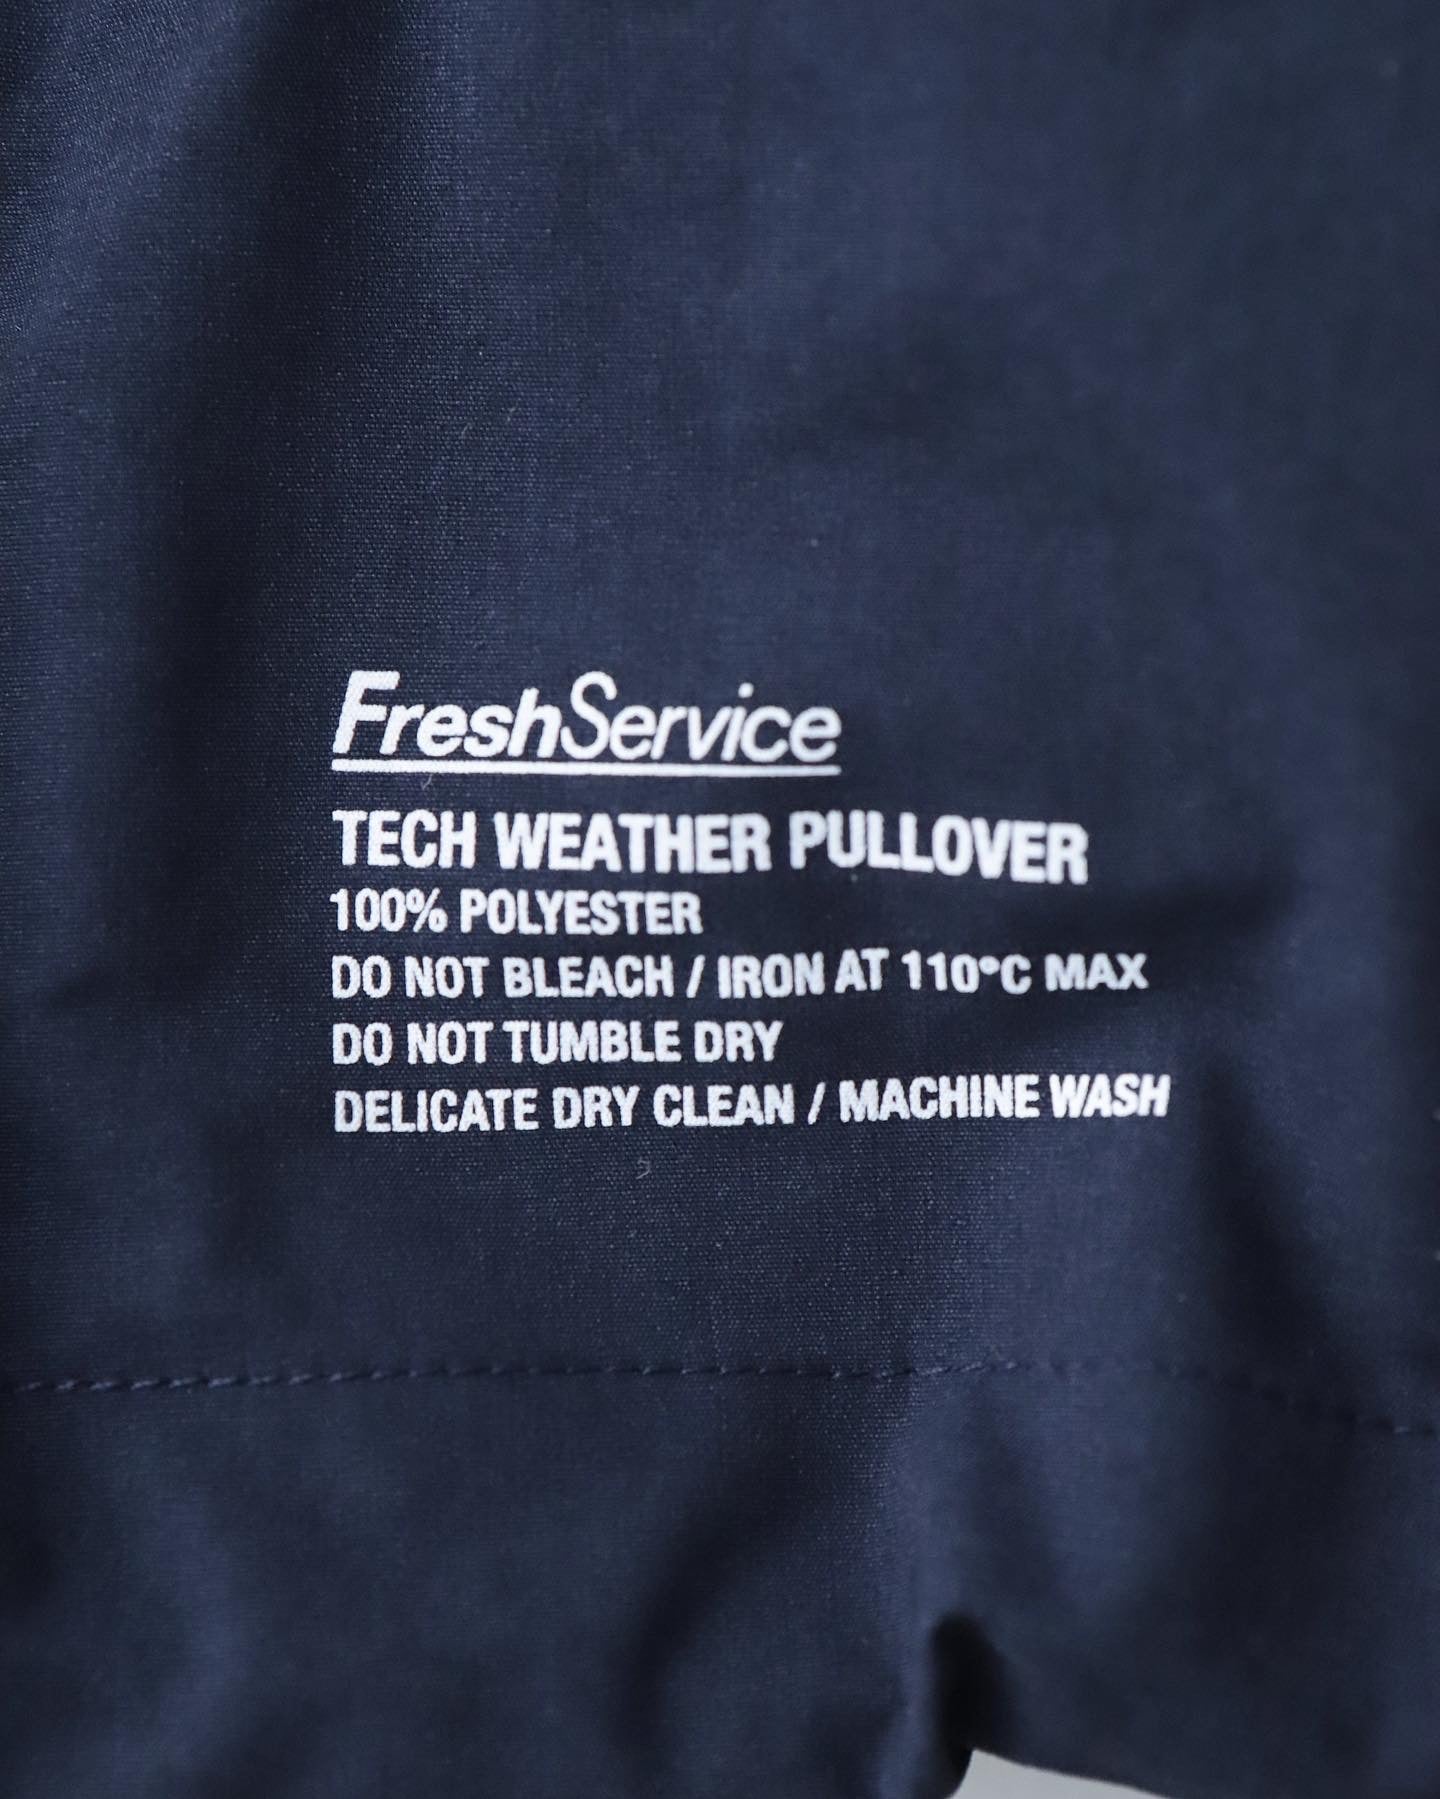 TECH WEATHER PULLOVER